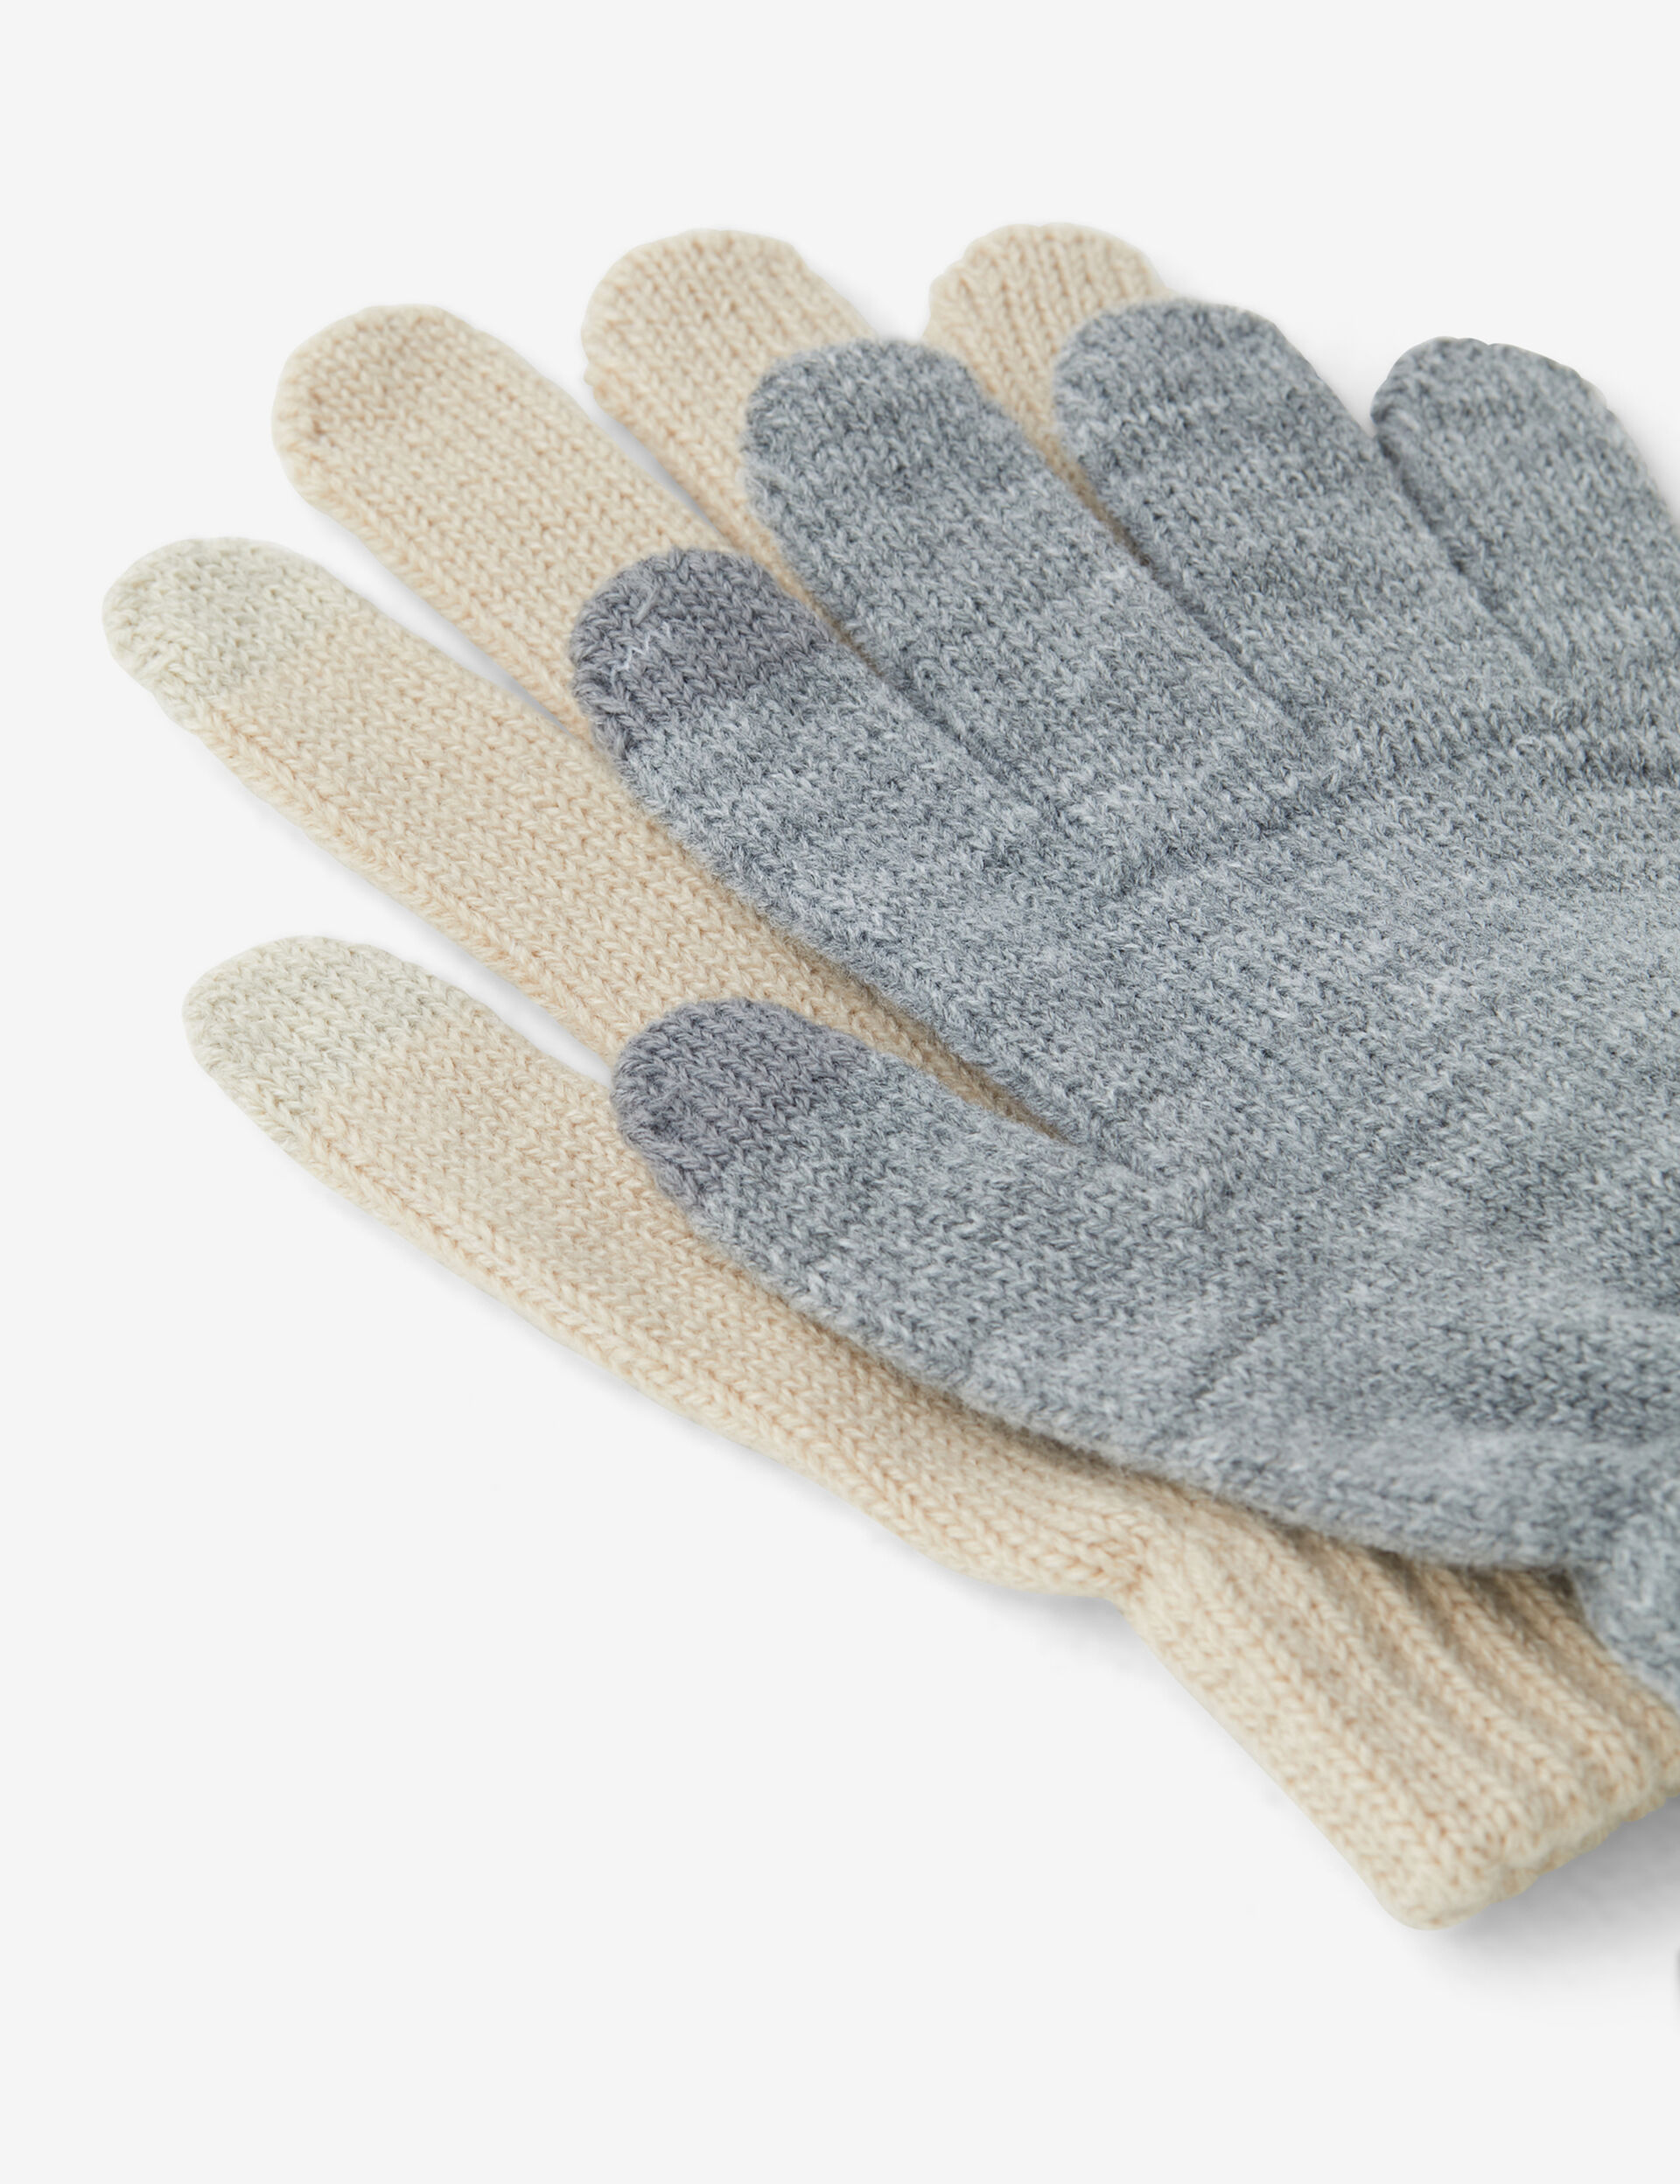 Touch-screen gloves